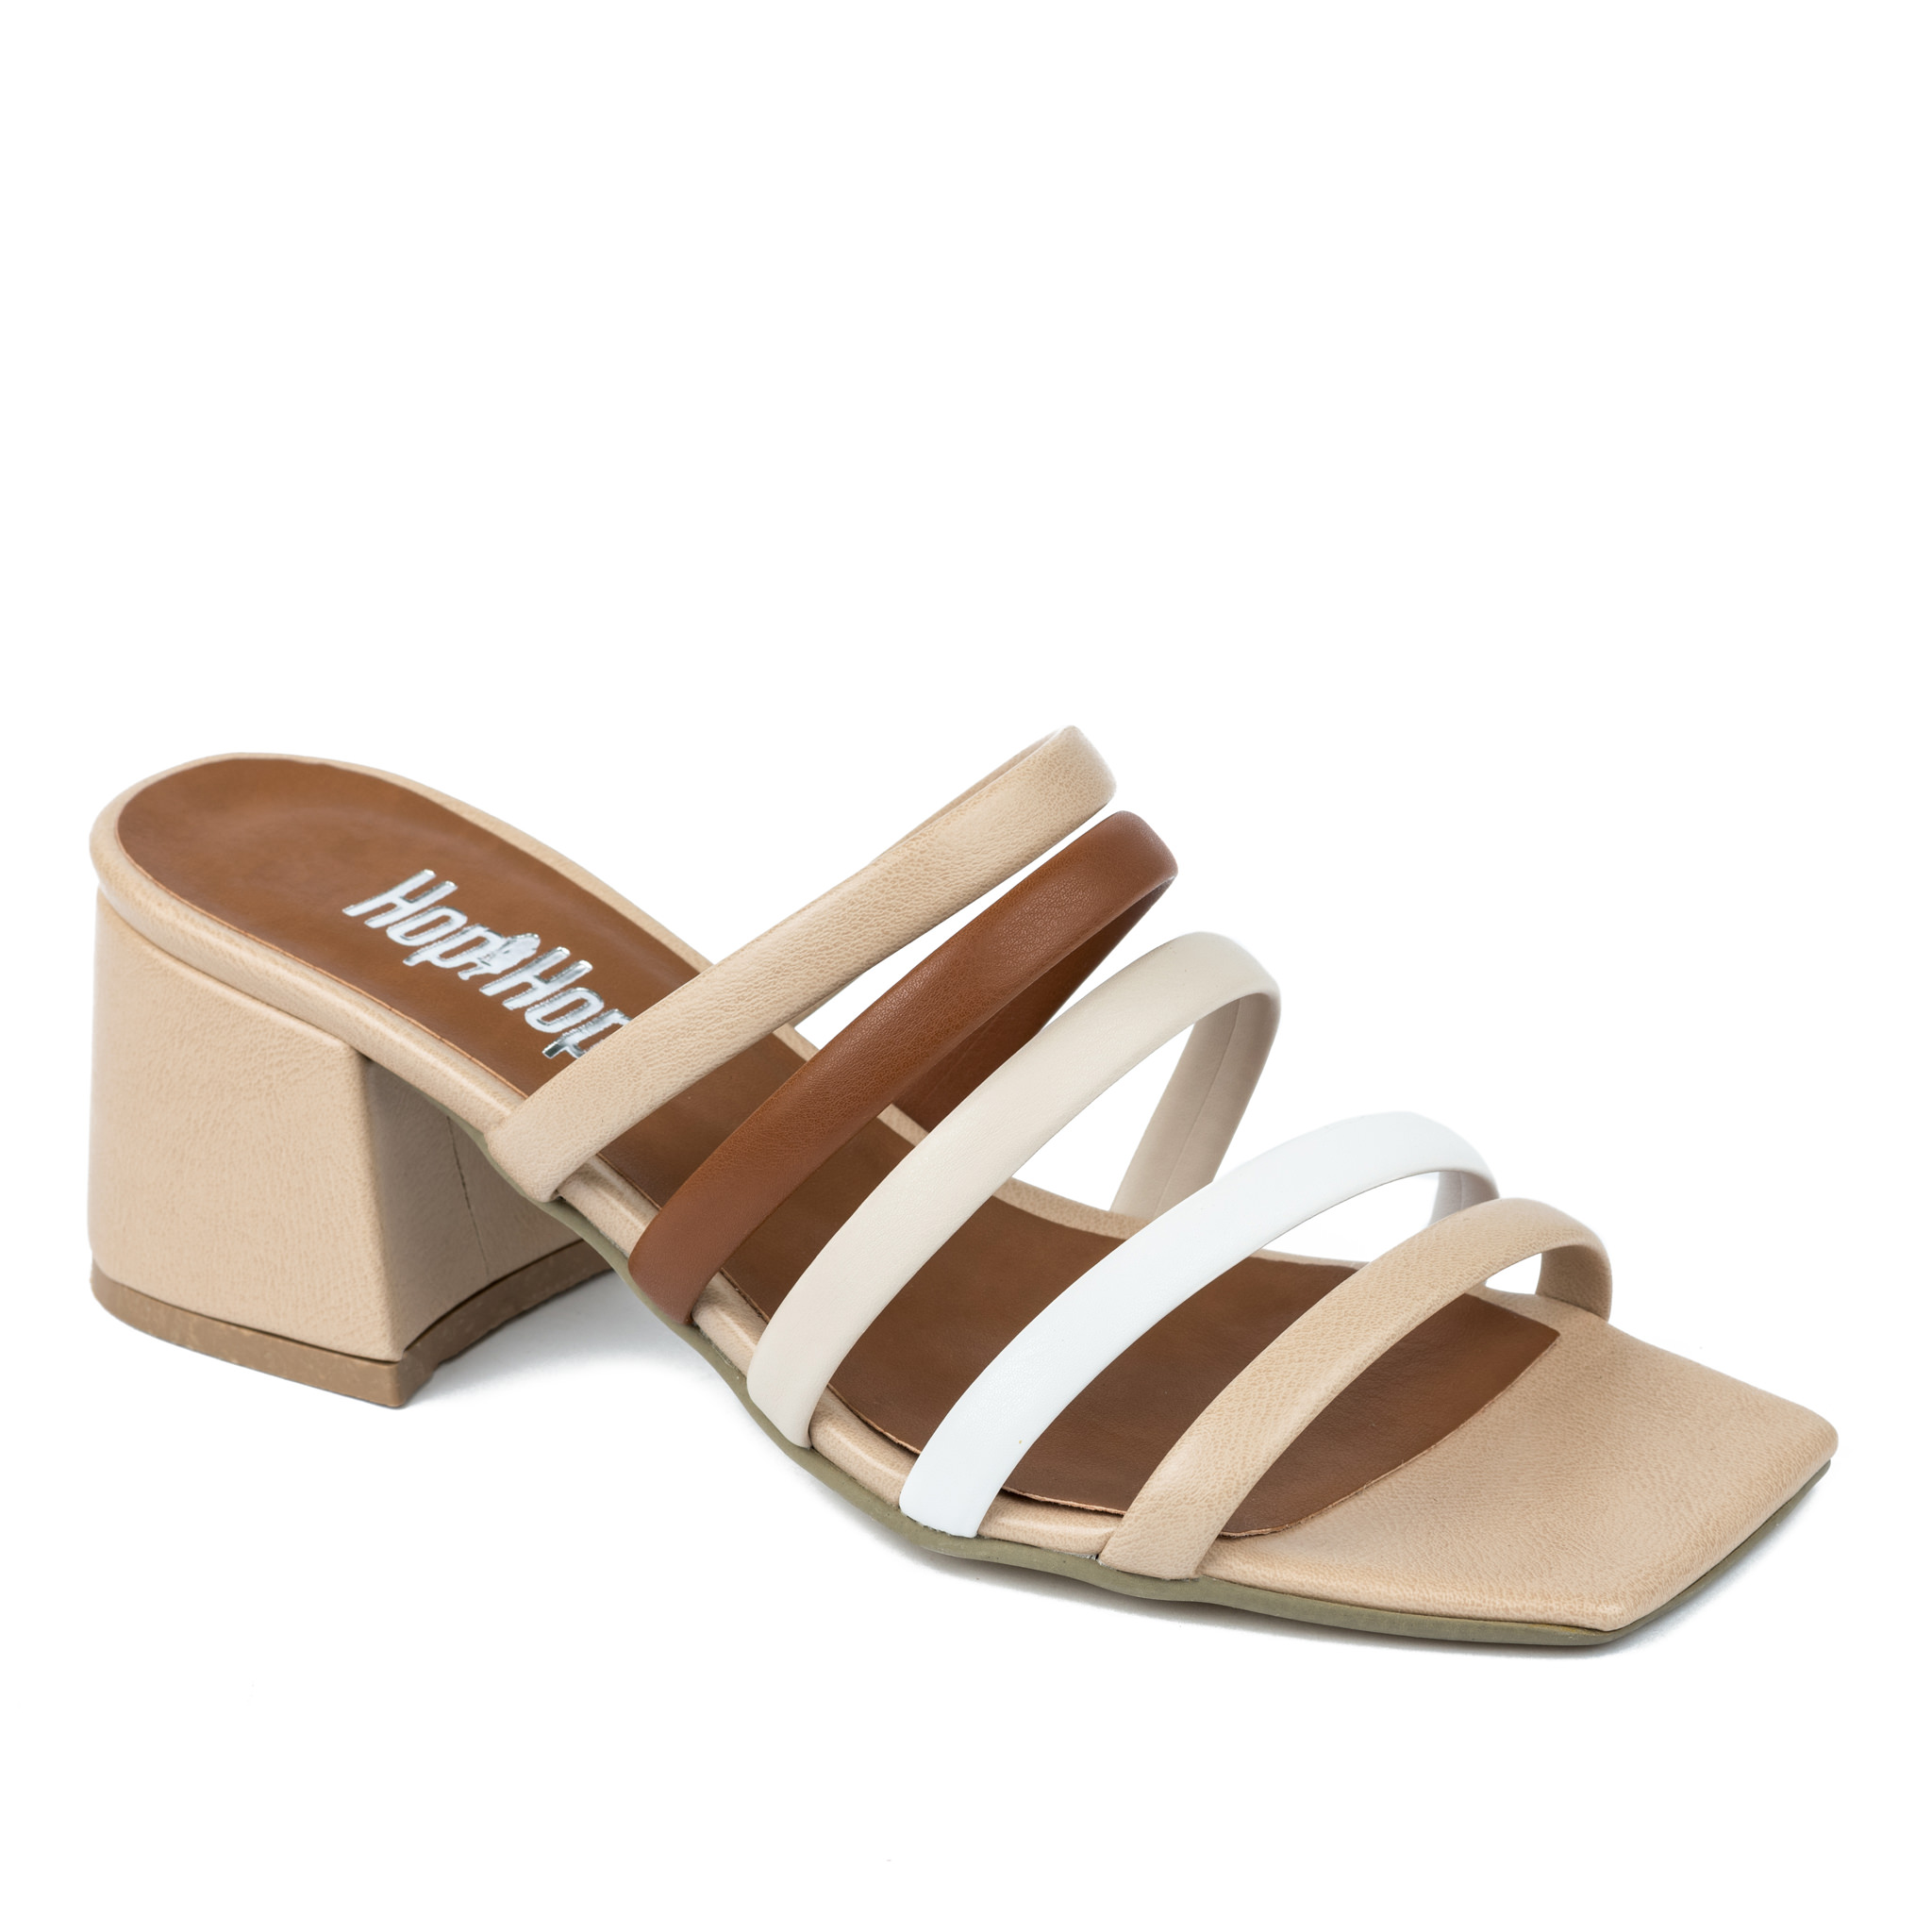 MULES WITH BLOCK HEEL AND BELTS - BEIGE